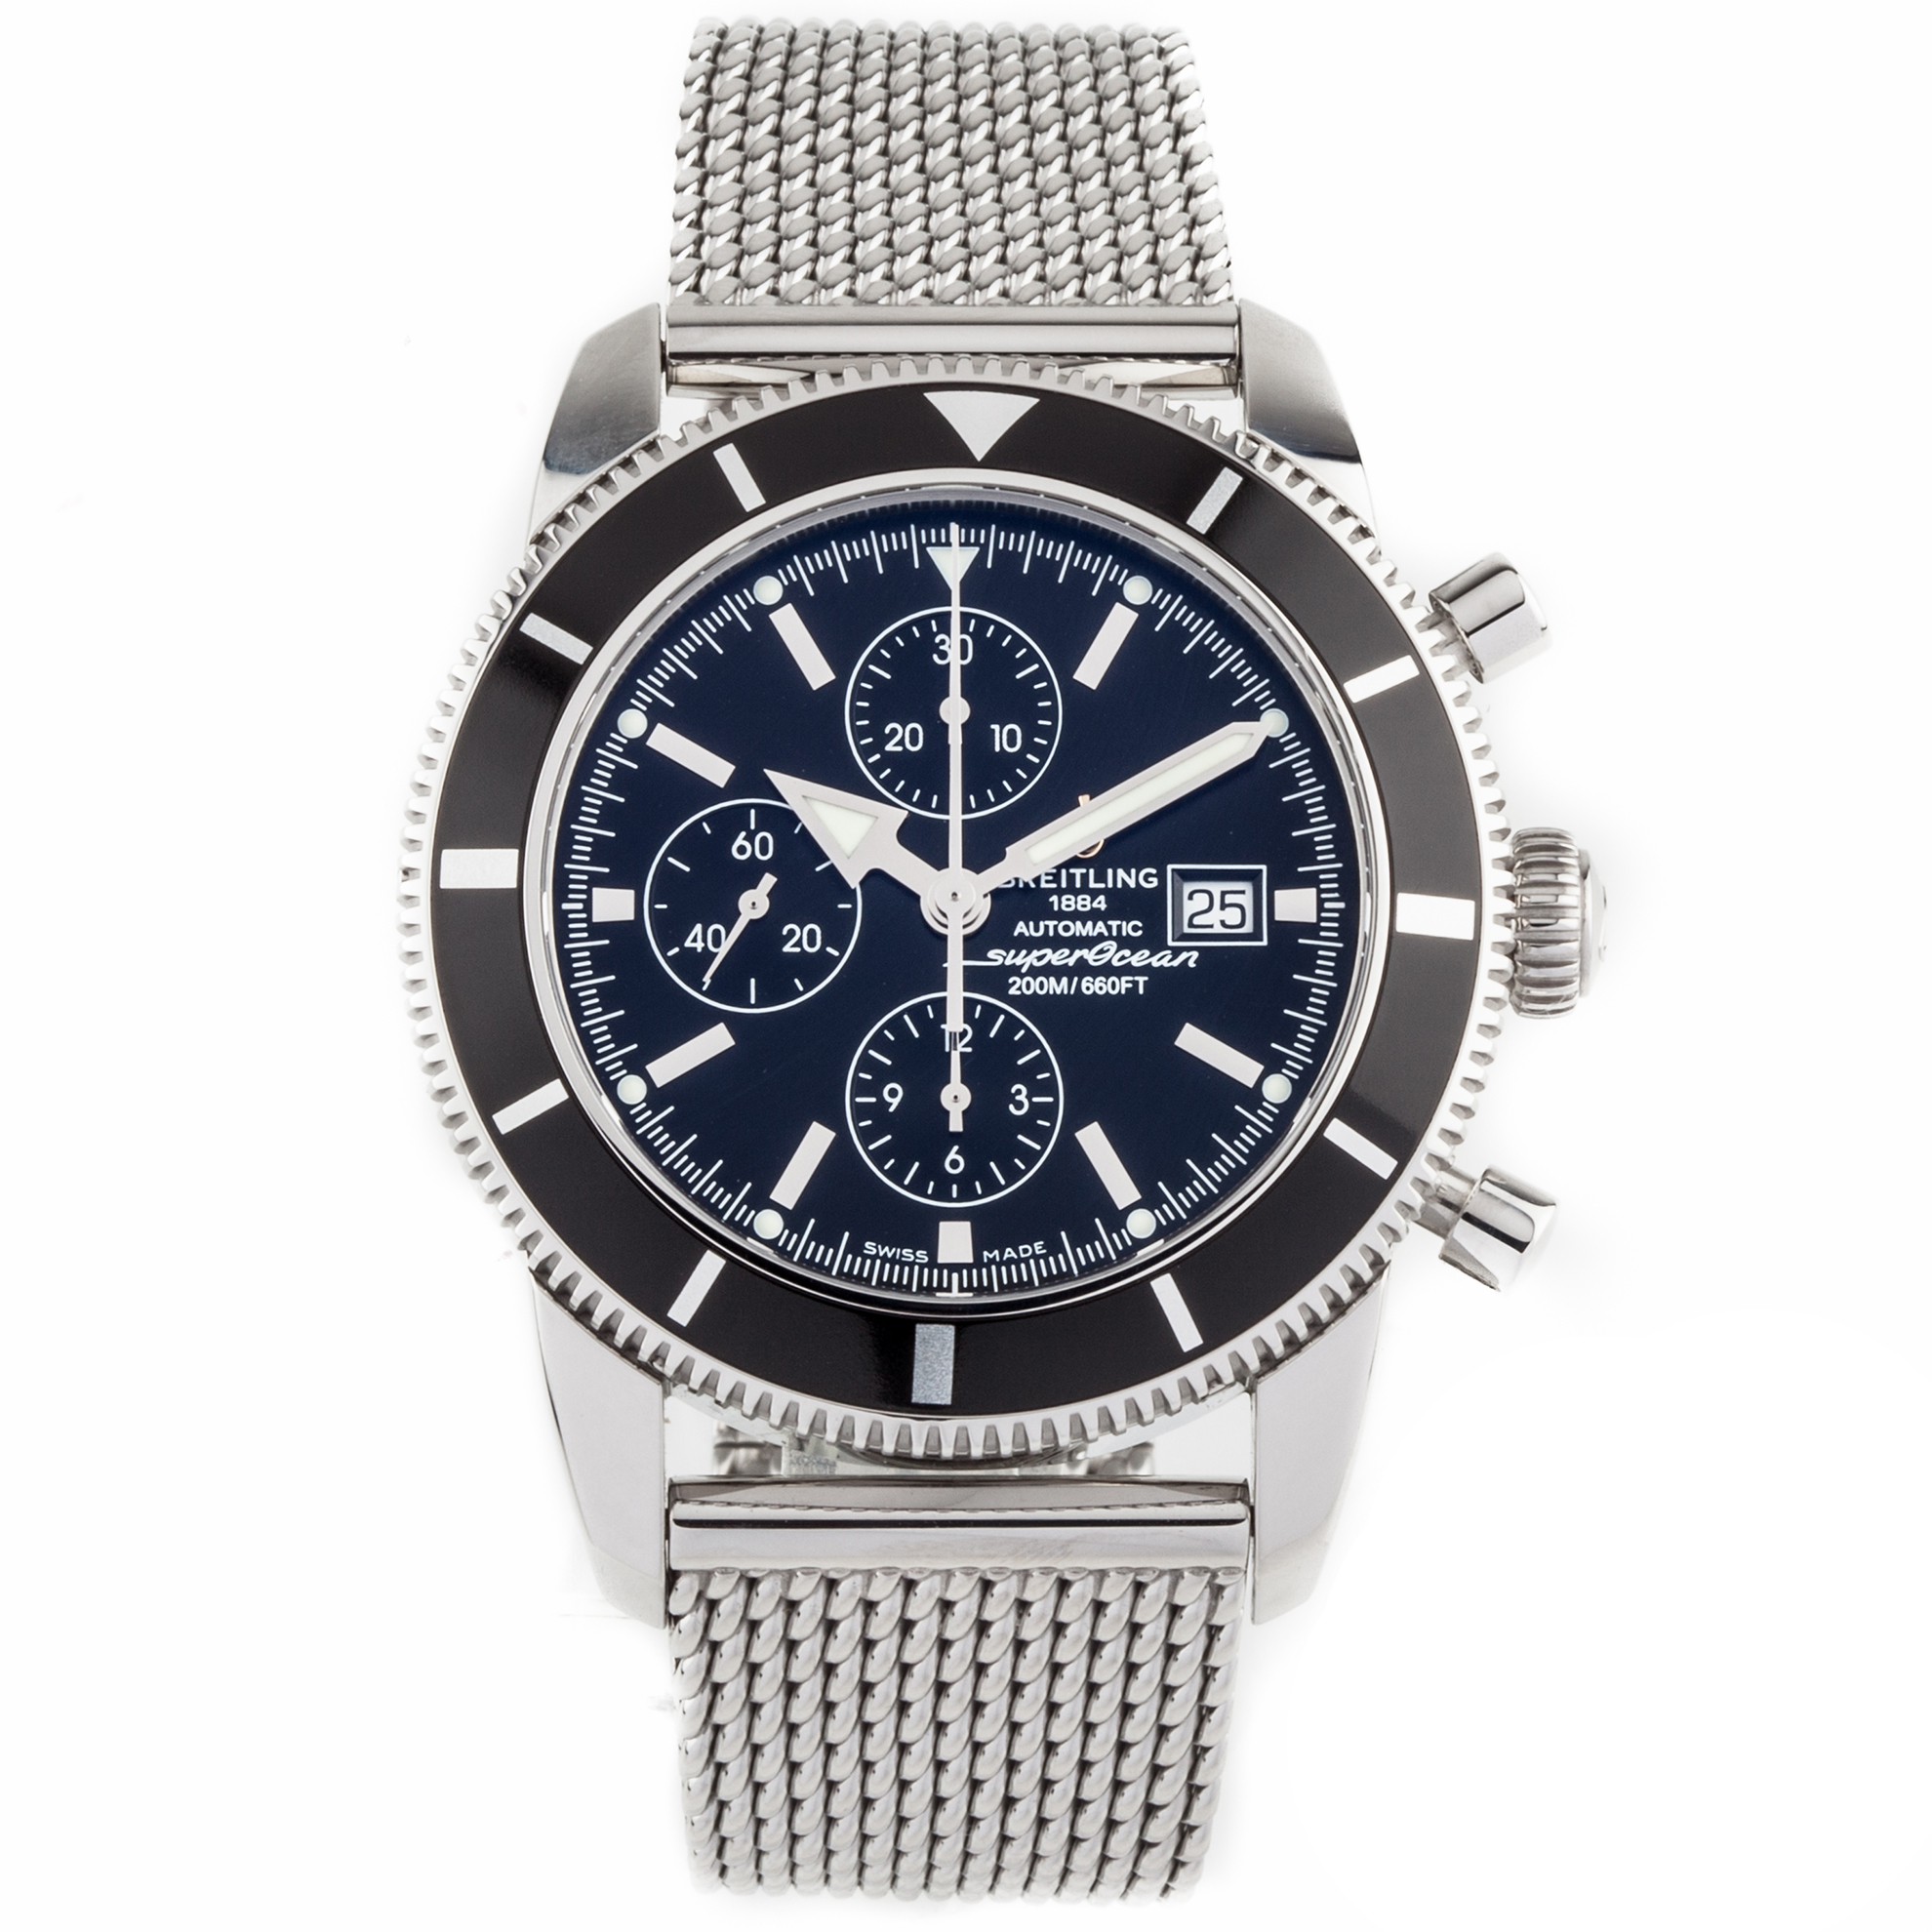 Breitling A1332024_B908 Breitling Superocean Heritage Chronograph Automatic Mesh Band